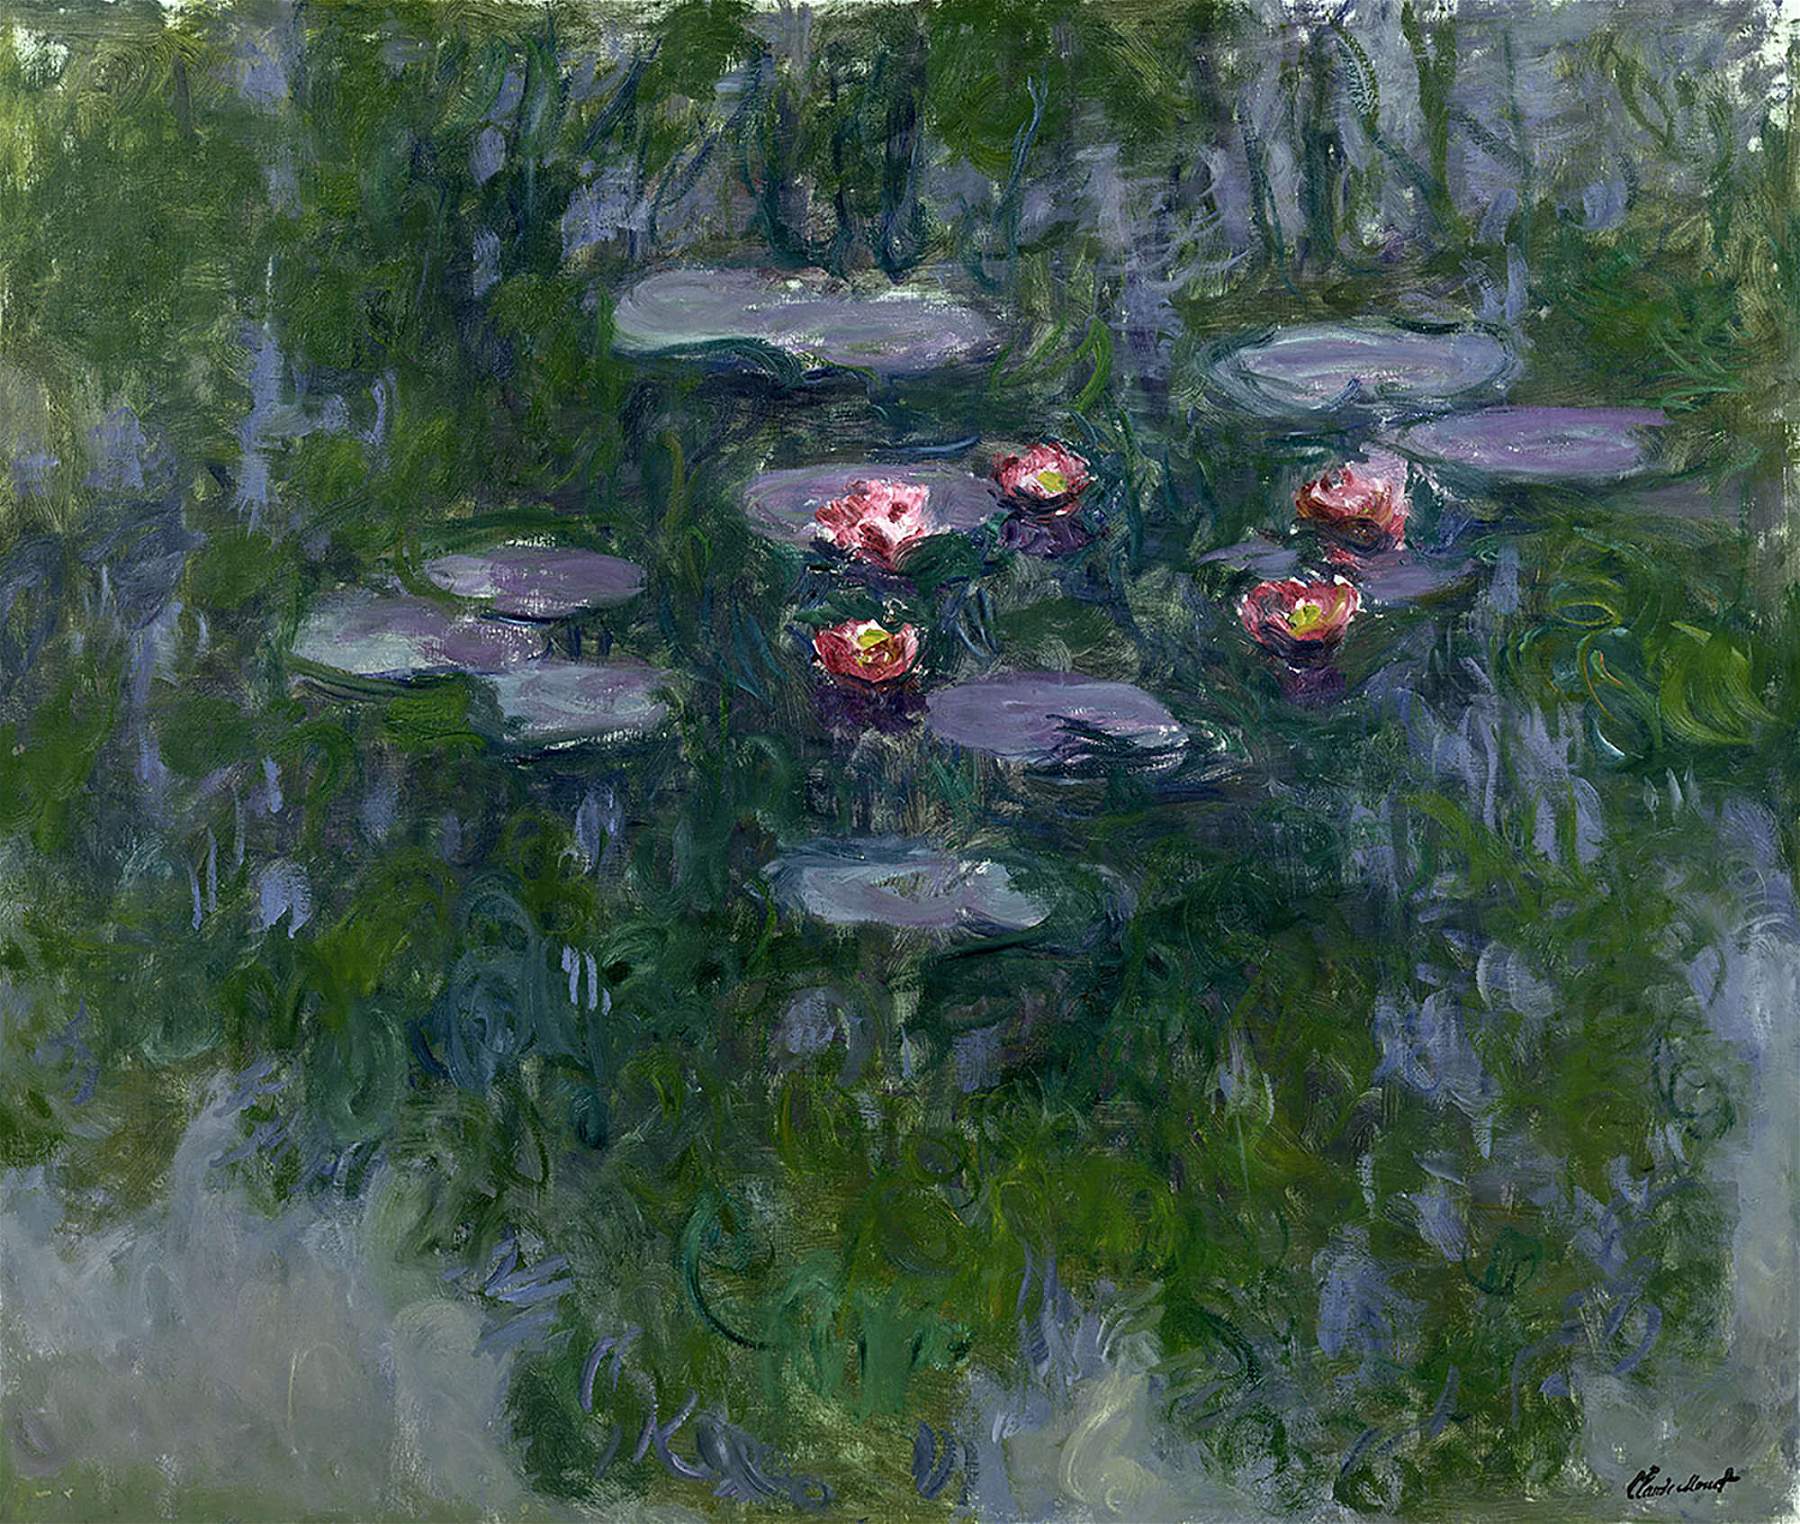 Monet on display in Padua with more than 50 works arriving from Paris